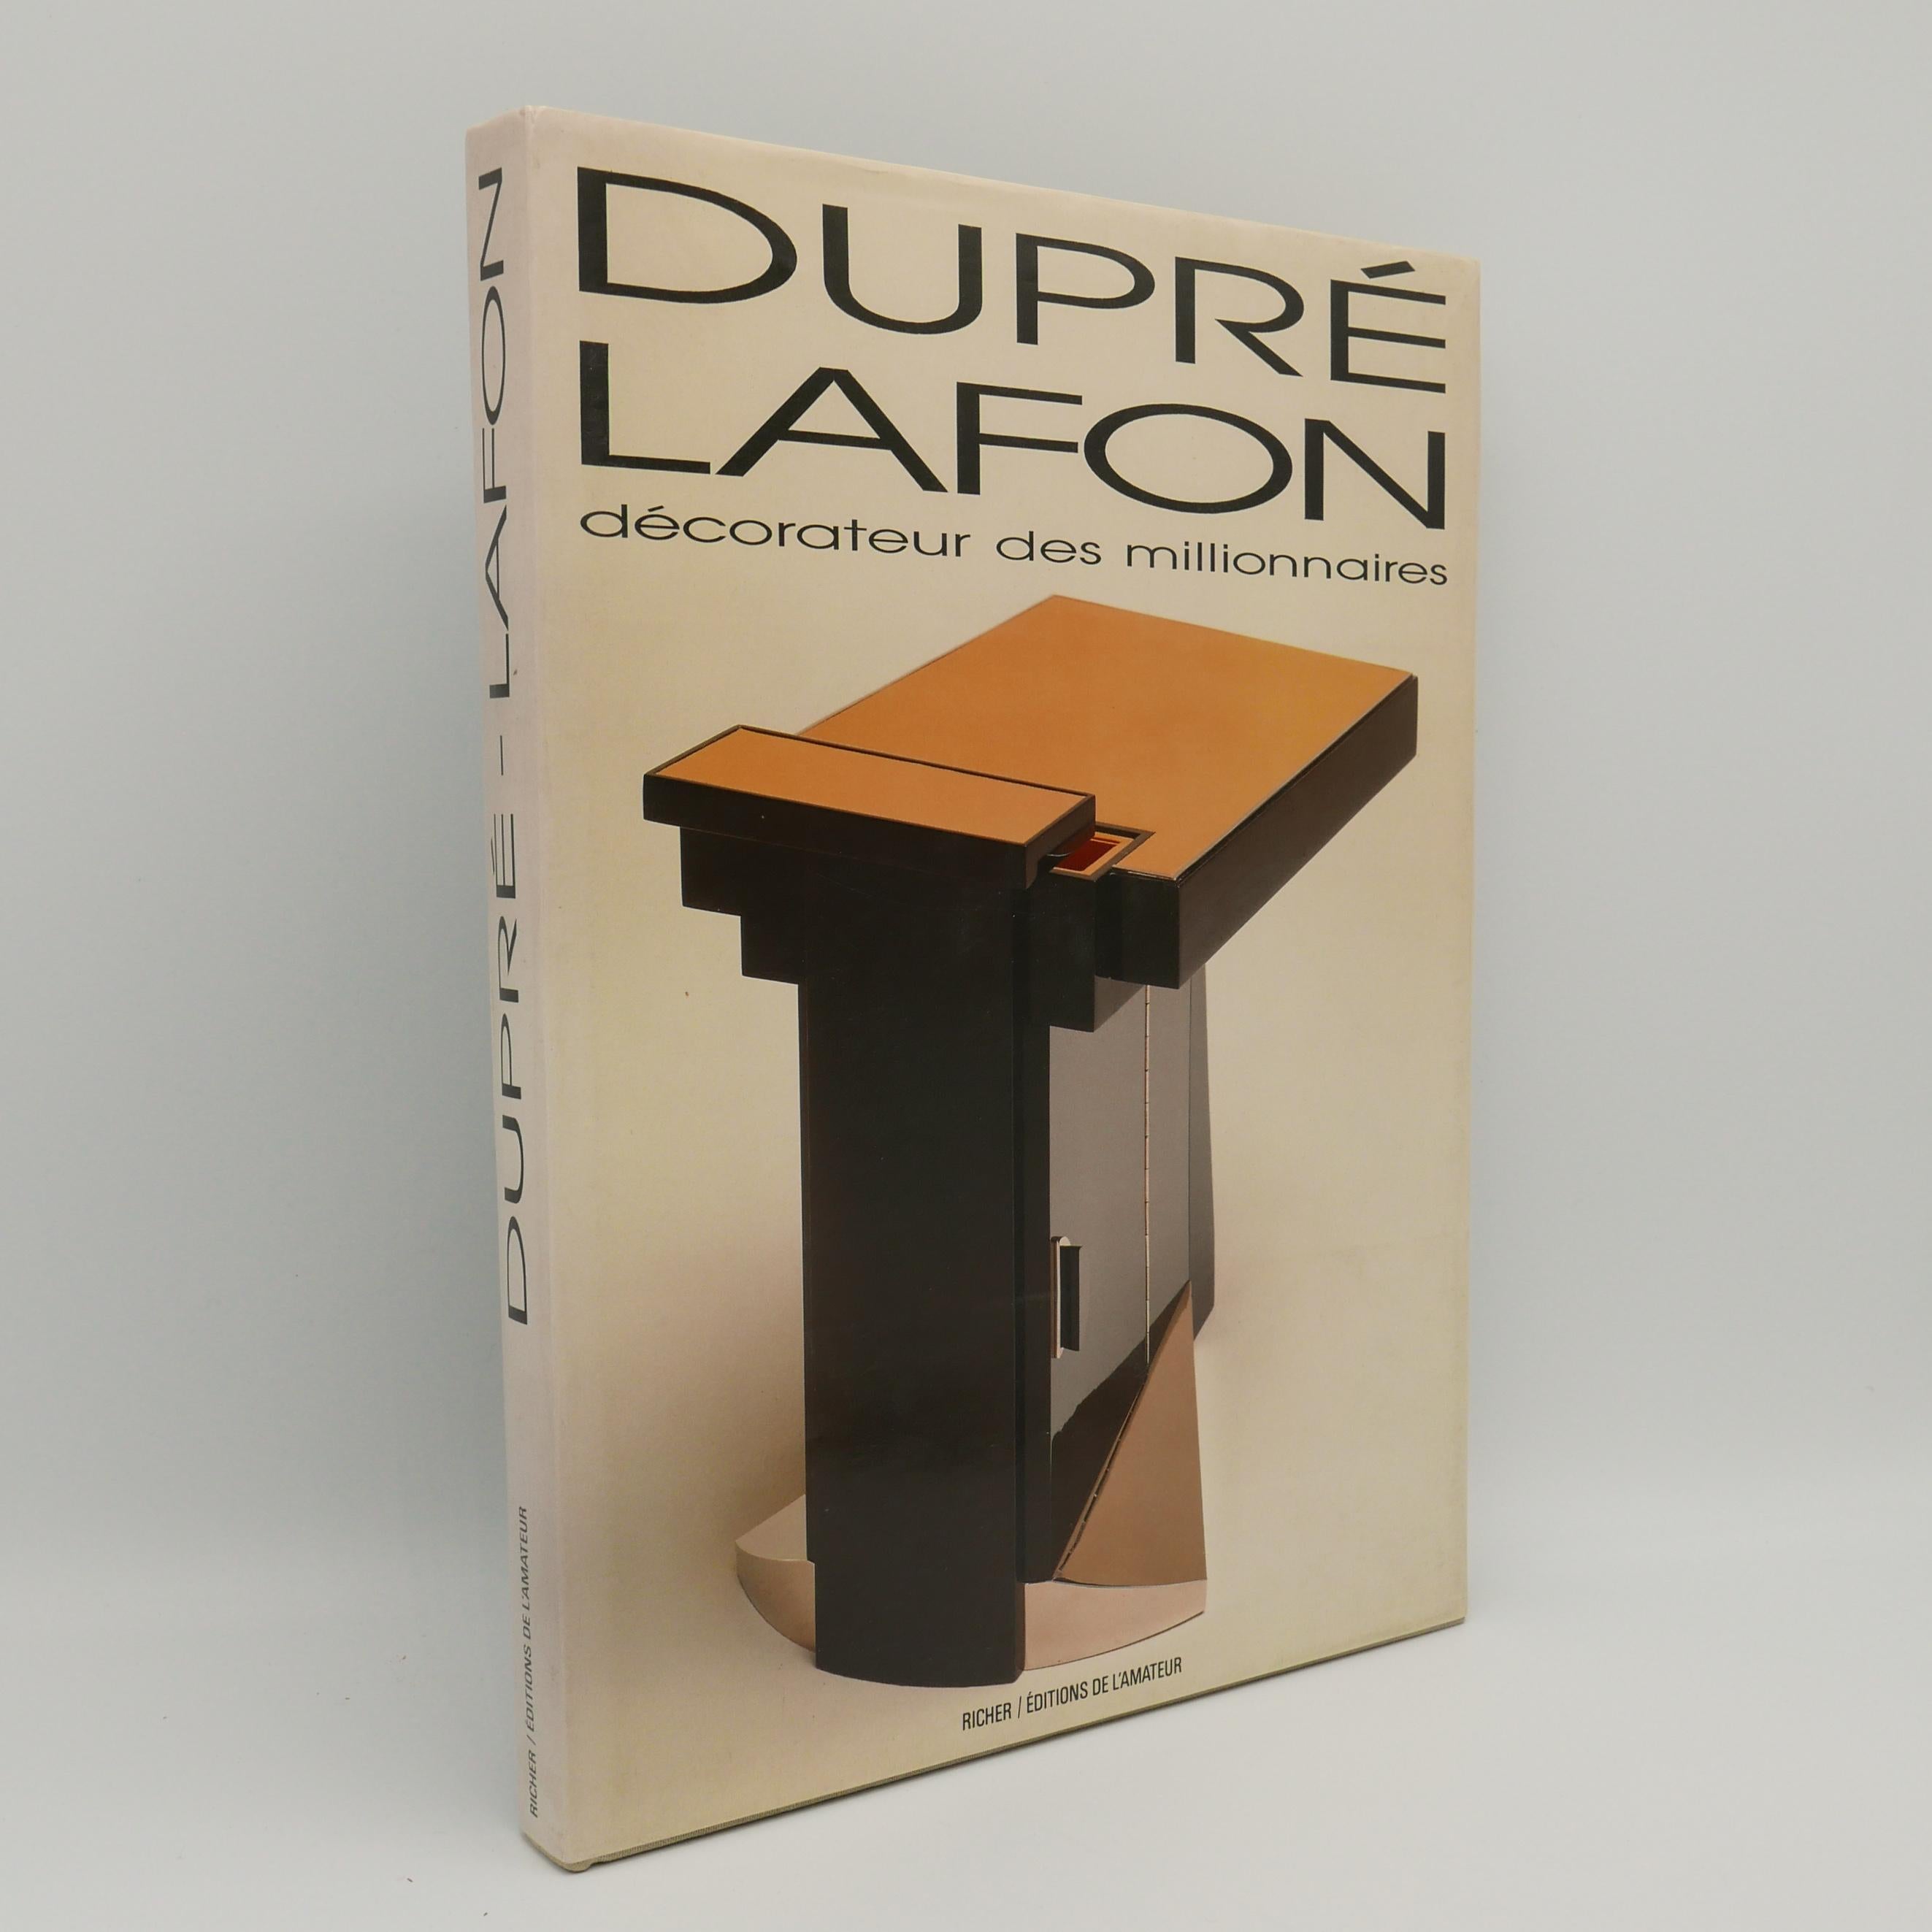 Hard-cover, 208 page monograph on the French Art Deco designer and interior designer Paul Dupre-Lafon. Titled 